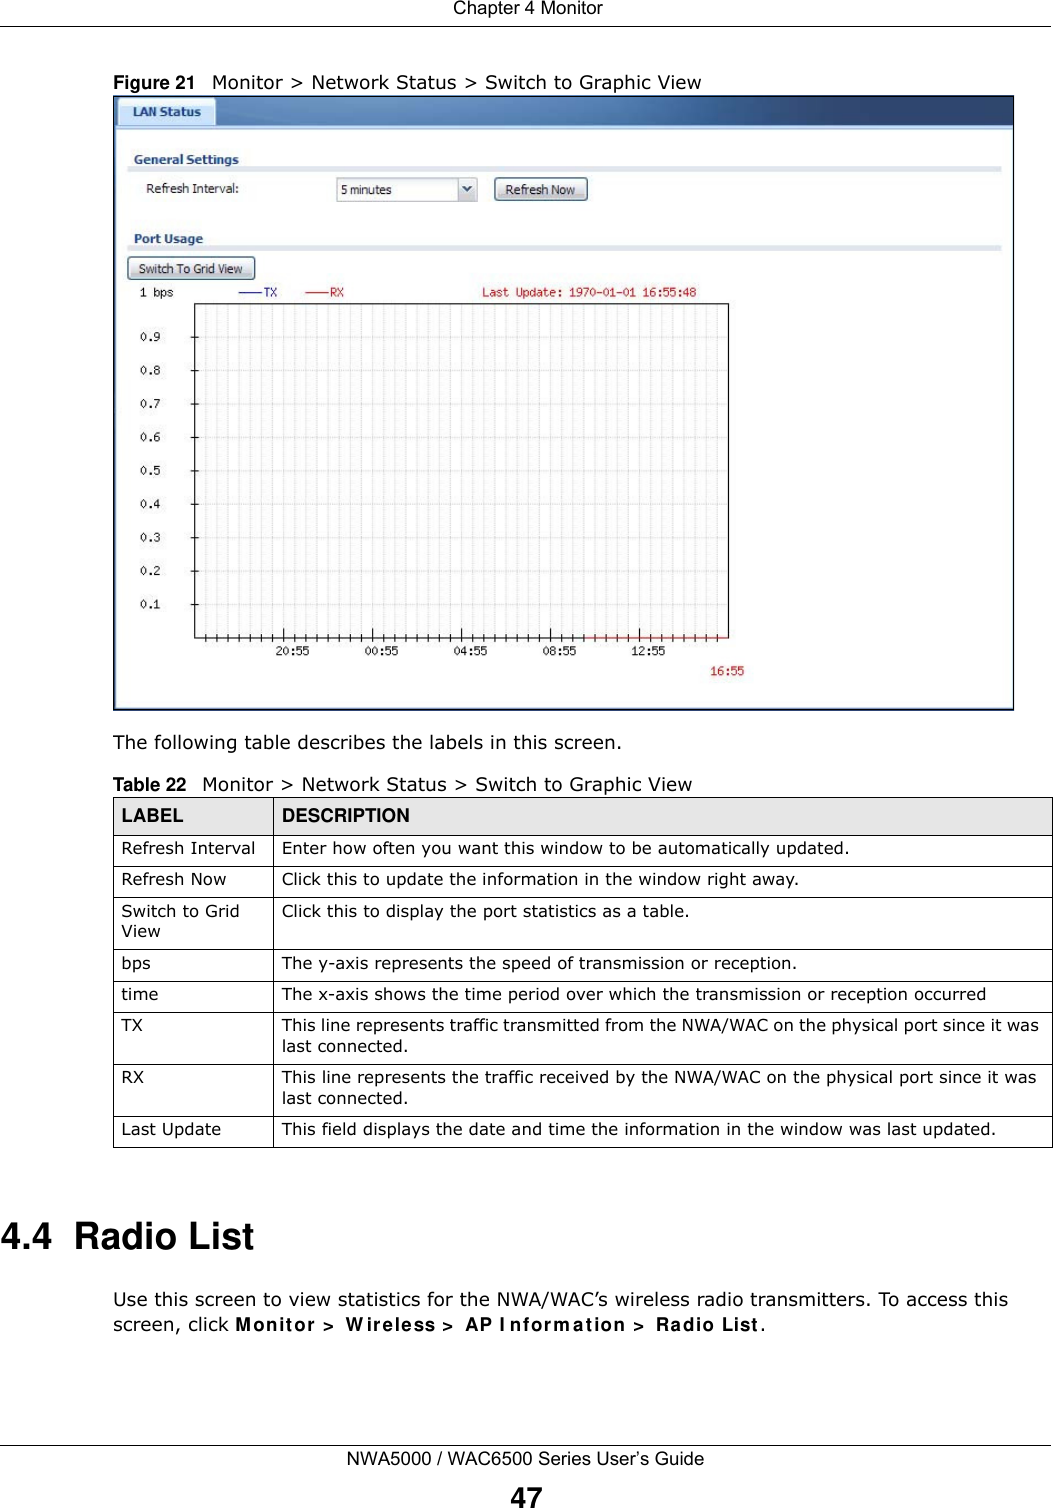  Chapter 4 MonitorNWA5000 / WAC6500 Series User’s Guide47Figure 21   Monitor &gt; Network Status &gt; Switch to Graphic View    The following table describes the labels in this screen. 4.4  Radio List Use this screen to view statistics for the NWA/WAC’s wireless radio transmitters. To access this screen, click Monitor &gt;  W ire less &gt;  AP I nform a tion &gt;  Ra dio List .Table 22   Monitor &gt; Network Status &gt; Switch to Graphic ViewLABEL DESCRIPTIONRefresh Interval Enter how often you want this window to be automatically updated.Refresh Now Click this to update the information in the window right away. Switch to Grid ViewClick this to display the port statistics as a table.bps The y-axis represents the speed of transmission or reception.time The x-axis shows the time period over which the transmission or reception occurredTX This line represents traffic transmitted from the NWA/WAC on the physical port since it was last connected.RX This line represents the traffic received by the NWA/WAC on the physical port since it was last connected.Last Update This field displays the date and time the information in the window was last updated. 